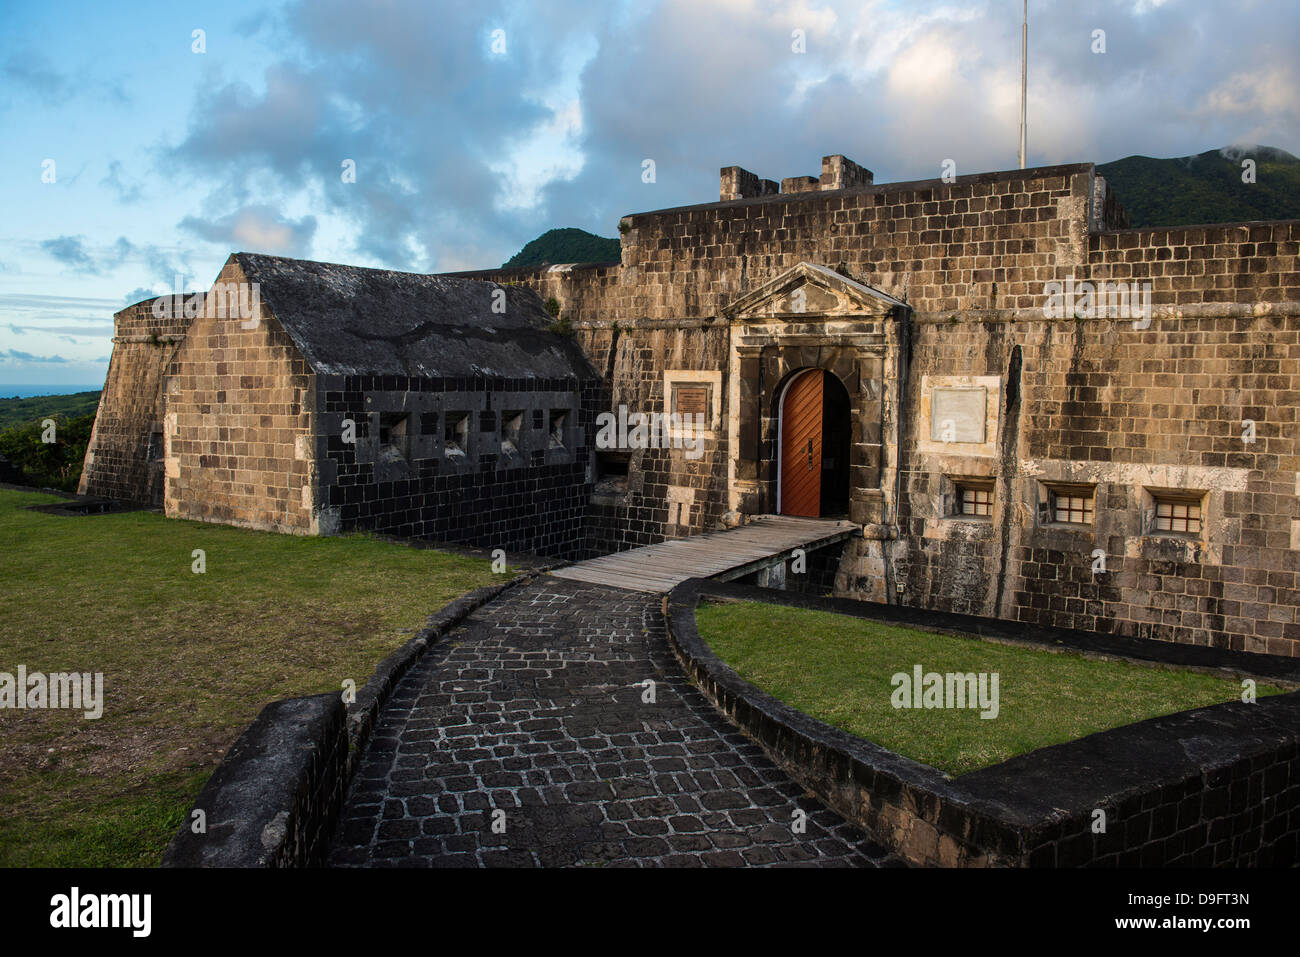 Brimstone Hill Fortress, UNESCO World Heritage Site, St. Kitts, St. Kitts and Nevis, Leeward Islands, West Indies, Caribbean Stock Photo